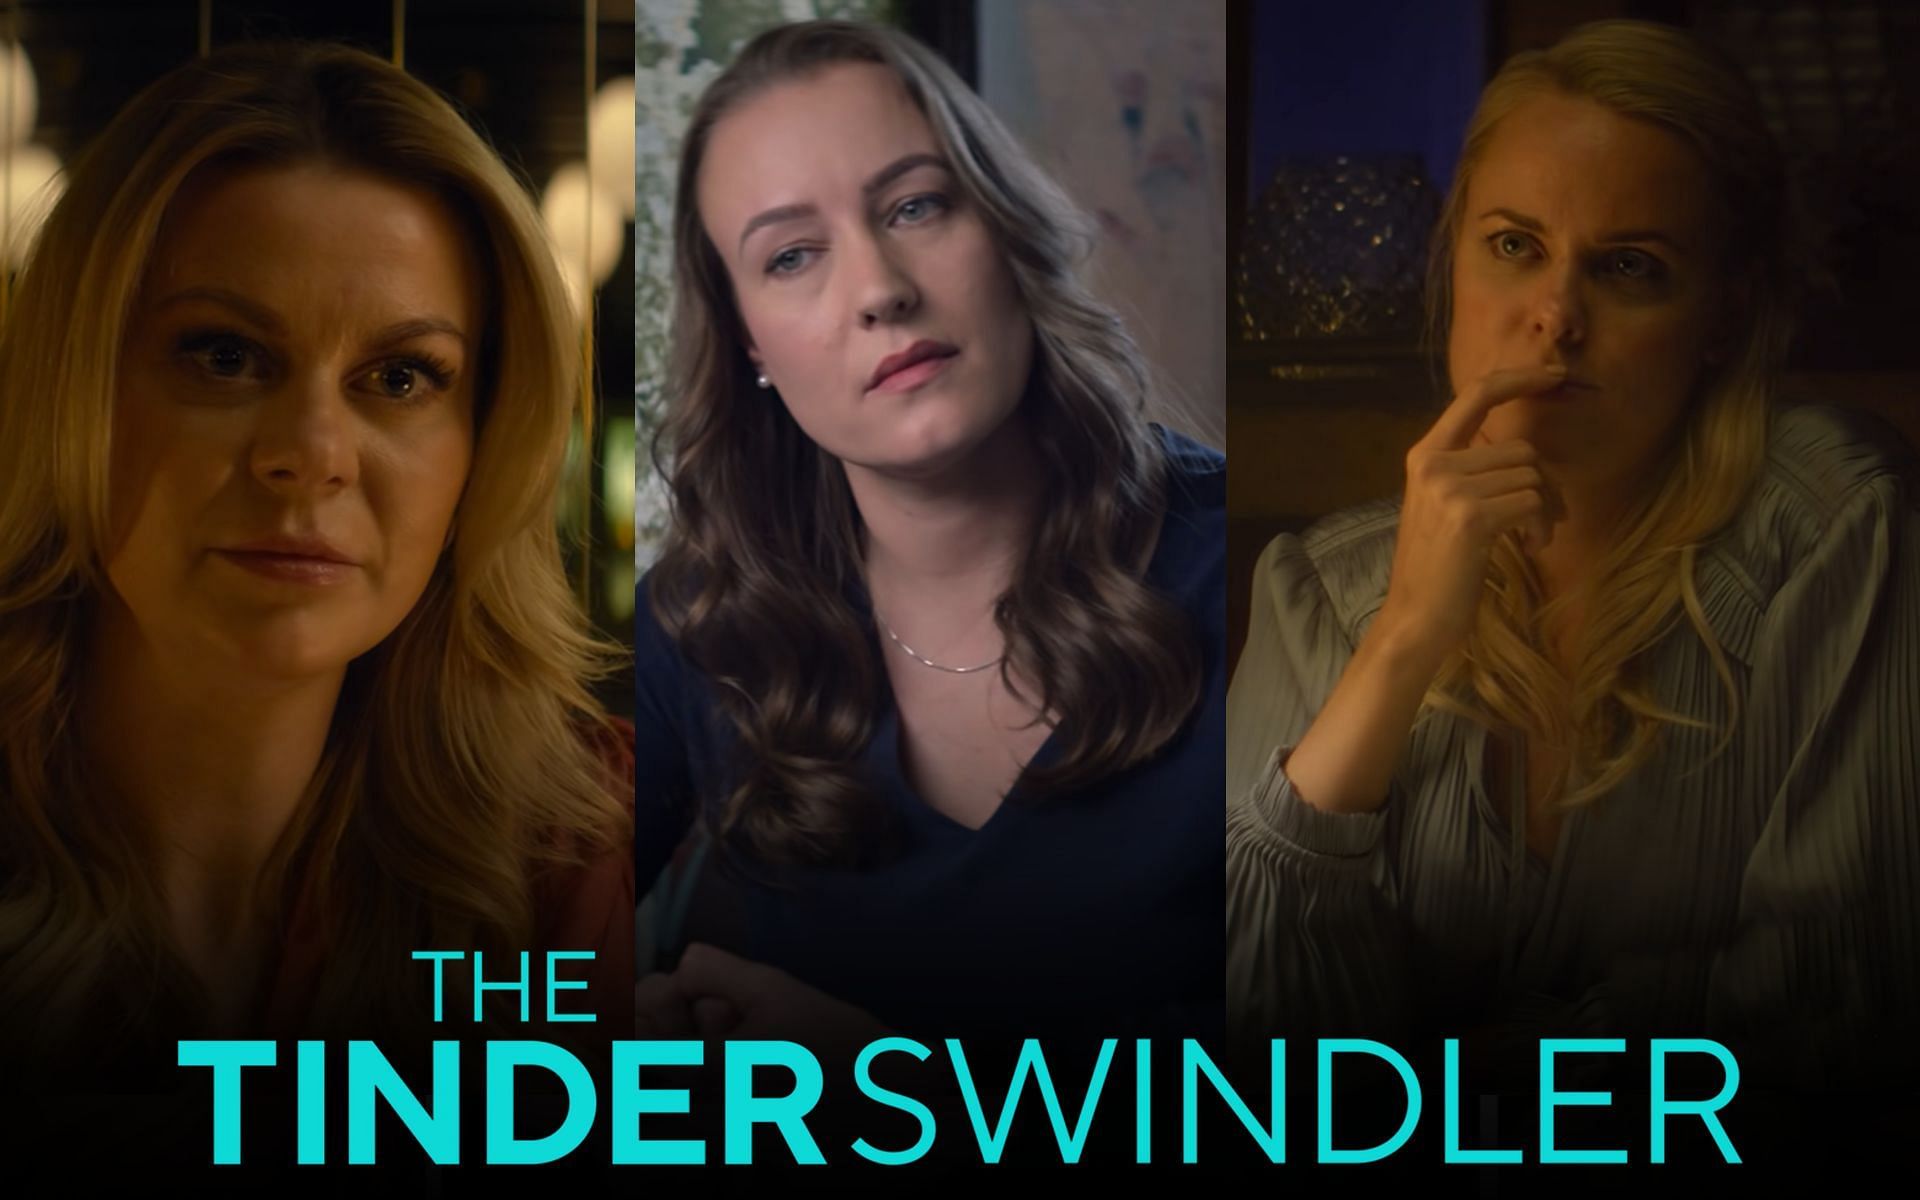 Where to watch &#39;The Tinder Swindler&#39;? Release date, trailer, and more